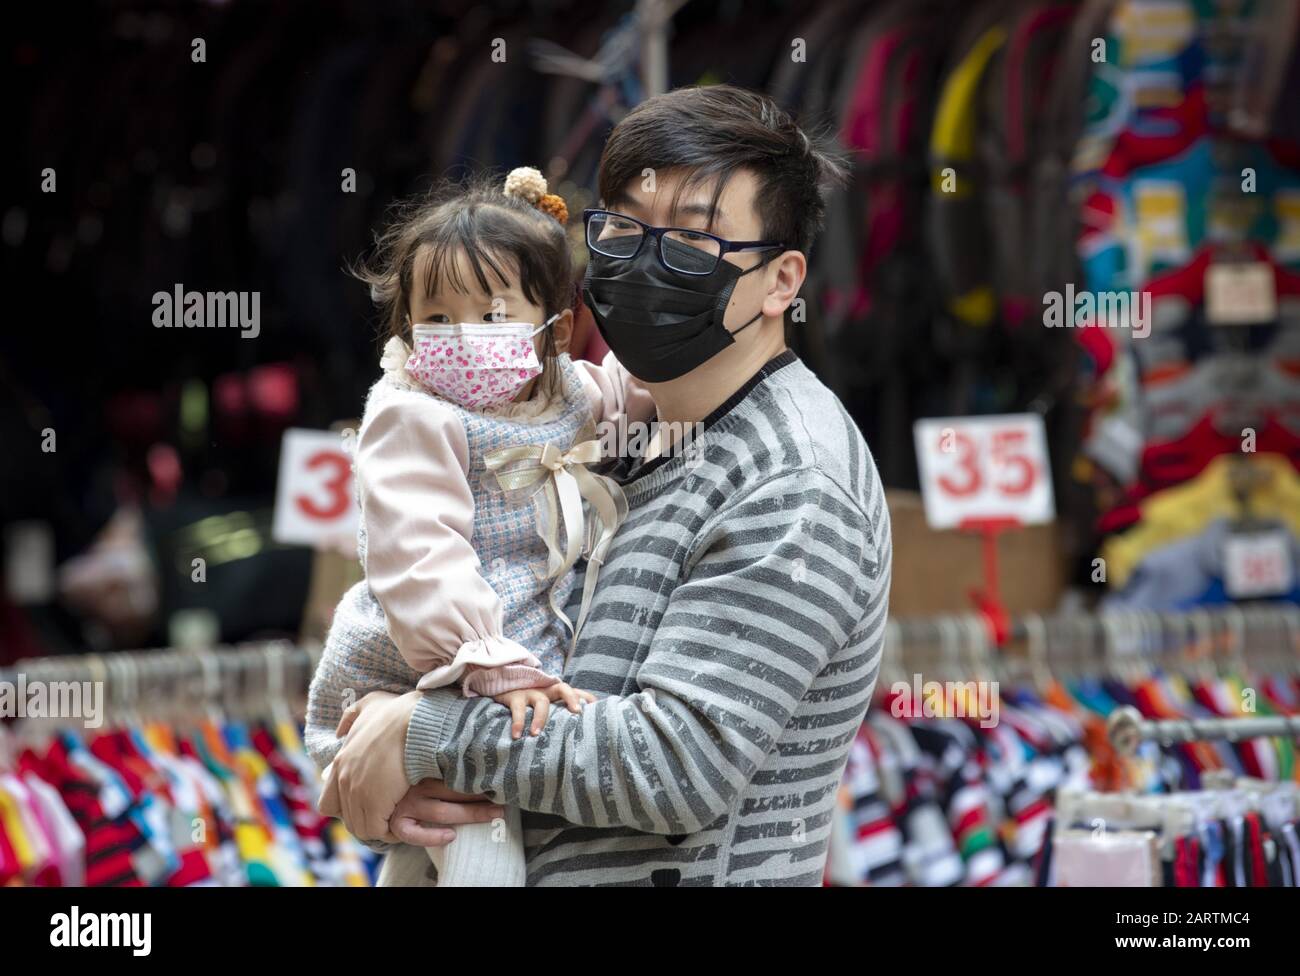 January 29, 2020, Hong Kong, Hong Kong SAR, China: A father and child wear masks. Fear of the Coronavirus from Wuhan China is evident on the streets of Hong Kong. North point markets are still busy. A father and daughter wear surgical masks (Credit Image: © Jayne Russell/ZUMA Wire) Stock Photo